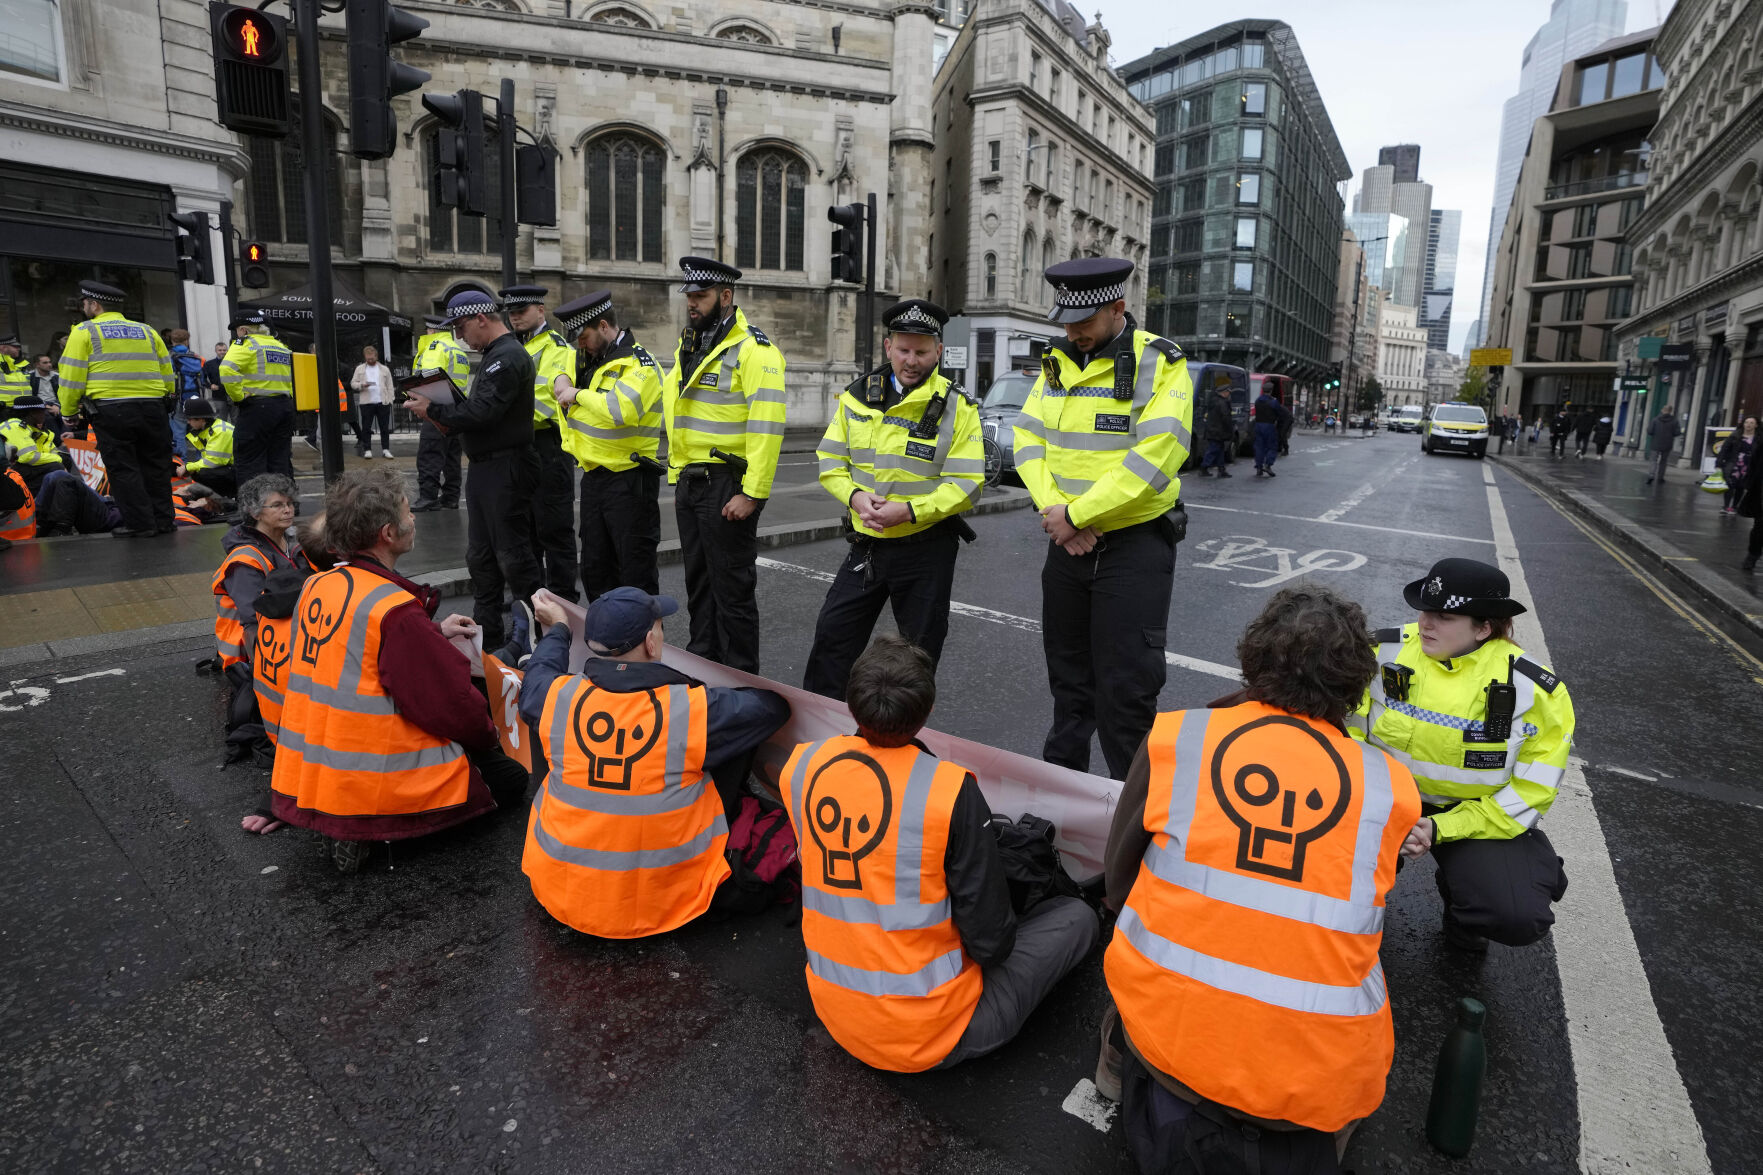 <p>FILE - Activists from the group Just Stop Oil block a road in London, on Oct. 27, 2022 demanding to stop future gas and oil projects from going ahead. Britain said on Monday July 31, 2023 it will grant hundreds of new oil and gas licenses in the North Sea in a bid for energy independence, ignoring calls from the environmental campaigners and the United Nations to stop the development of new fossil fuel projects. (AP Photo/Kirsty Wigglesworth, File)</p>   PHOTO CREDIT: Kirsty Wigglesworth